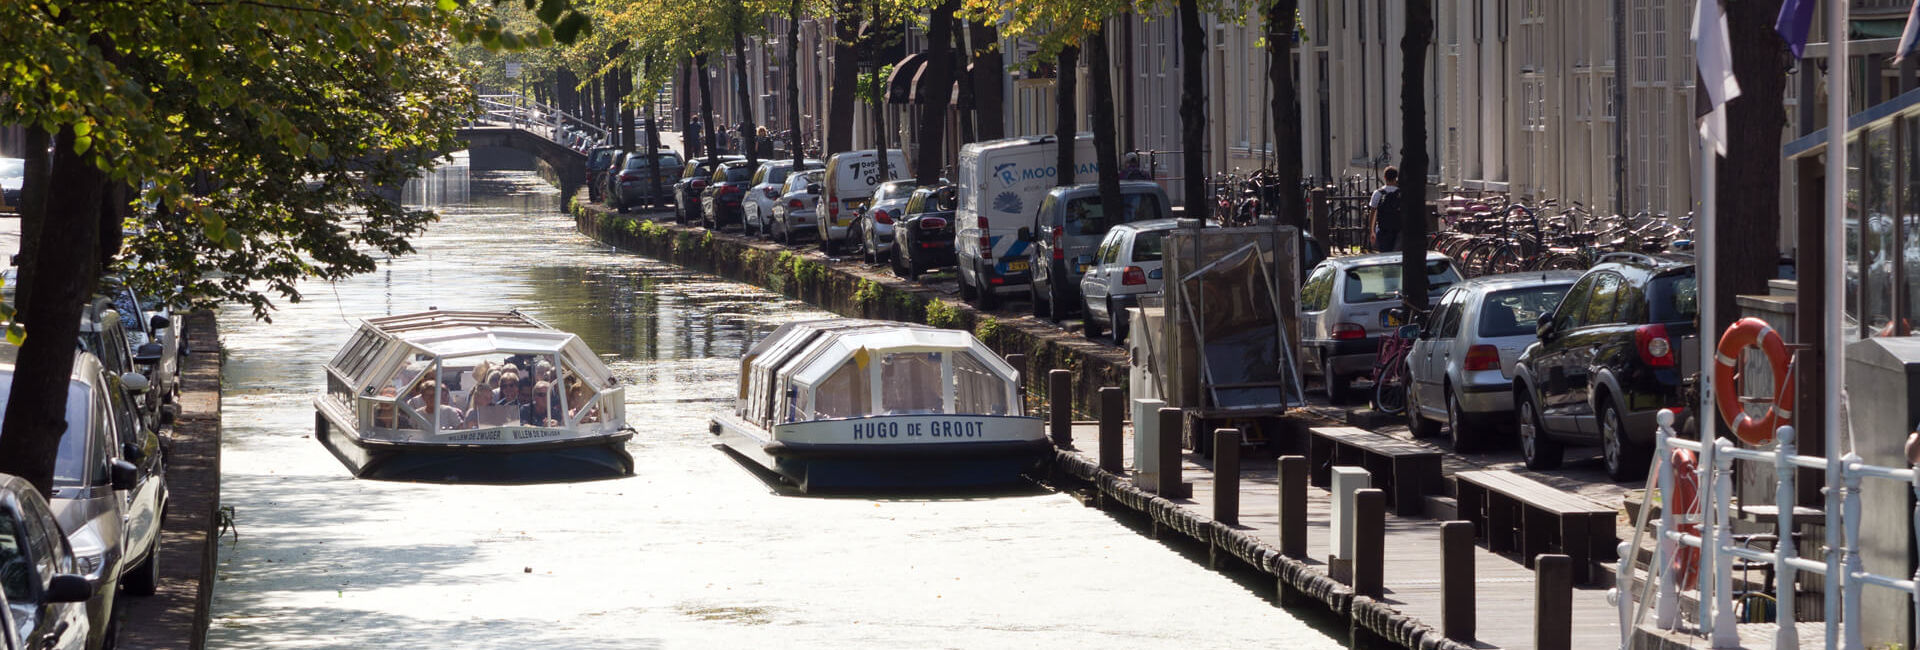 Canal Boats in the canals of Delft